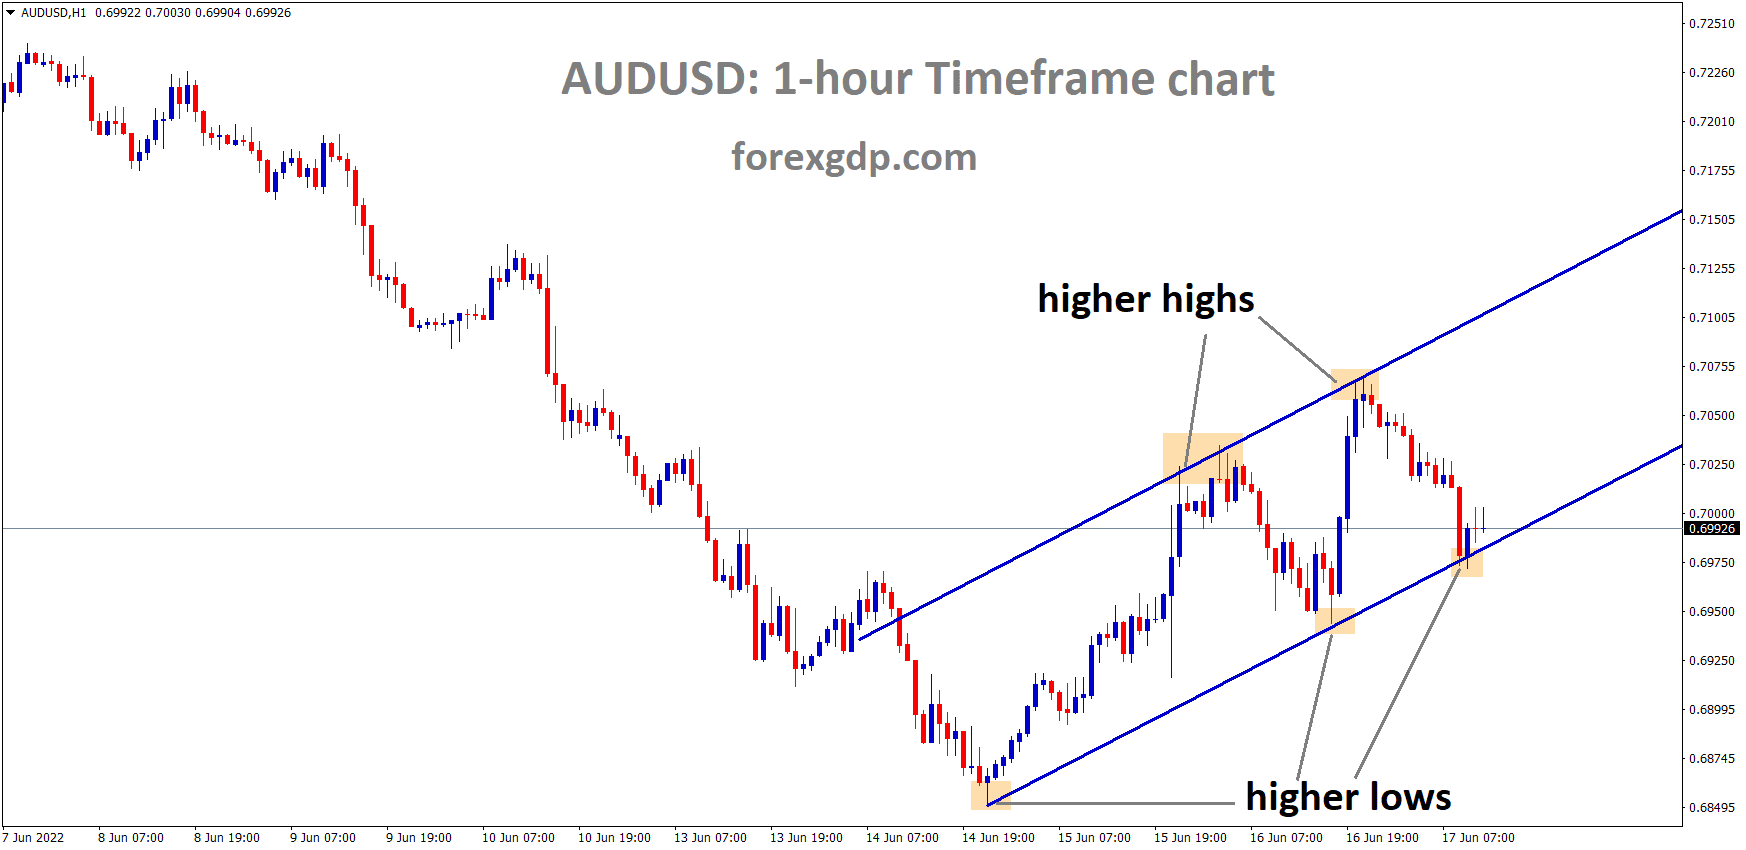 AUDUSD is moving in an Ascending channel and the Market has reached the higher low area of the channel